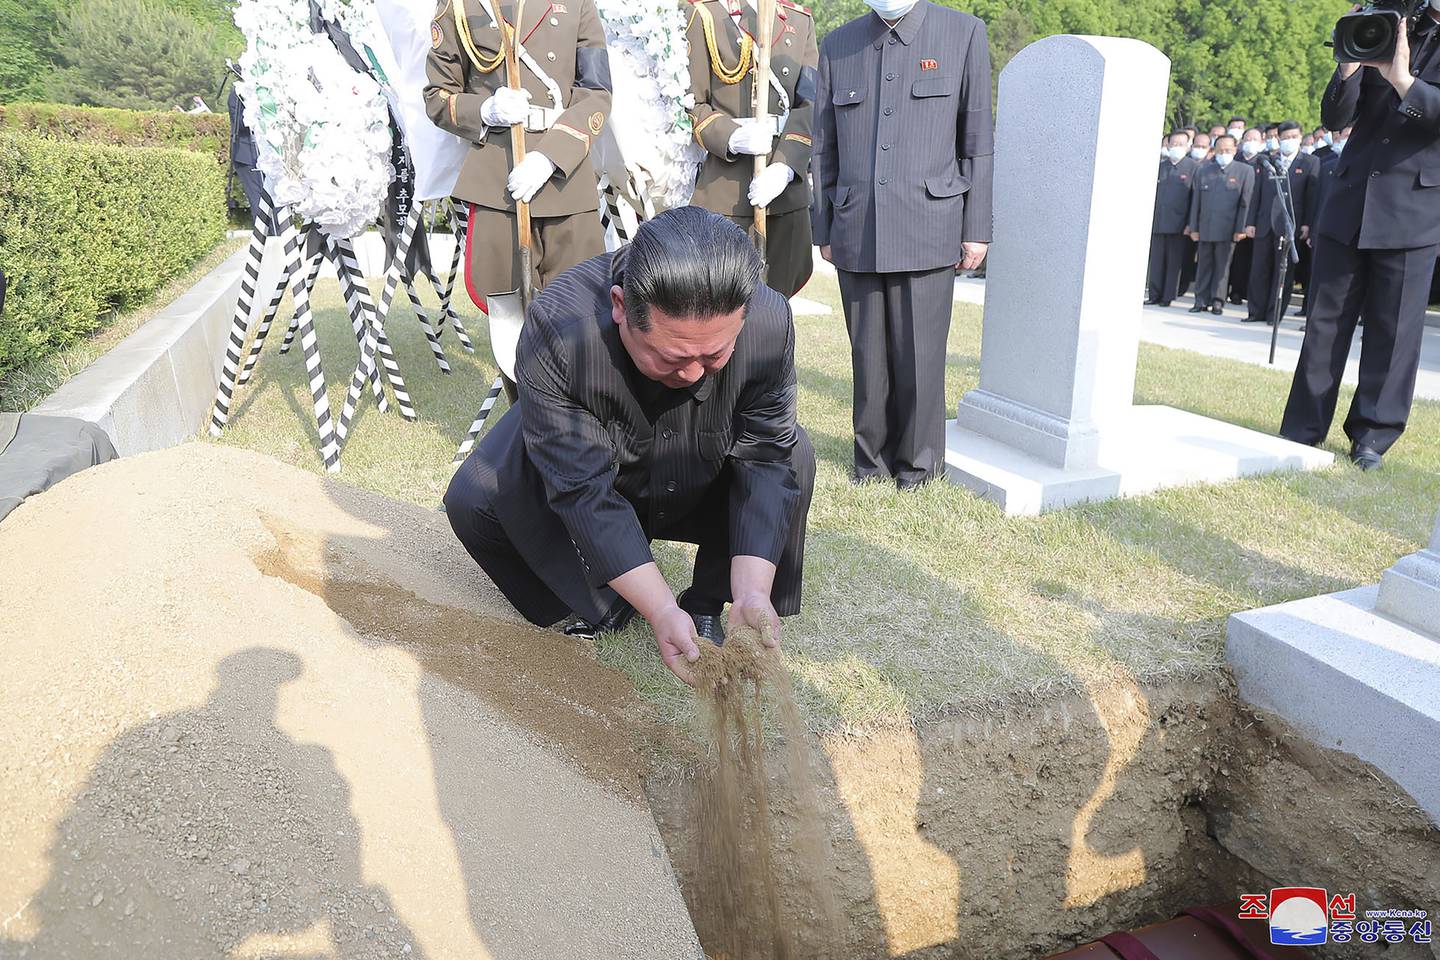 Kim Jong-un covers the coffin of Marshal of the Korean People's Army Hyon Chol-hae with earth at a cemetery in Pyongyang. Korean Central News Agency/AP